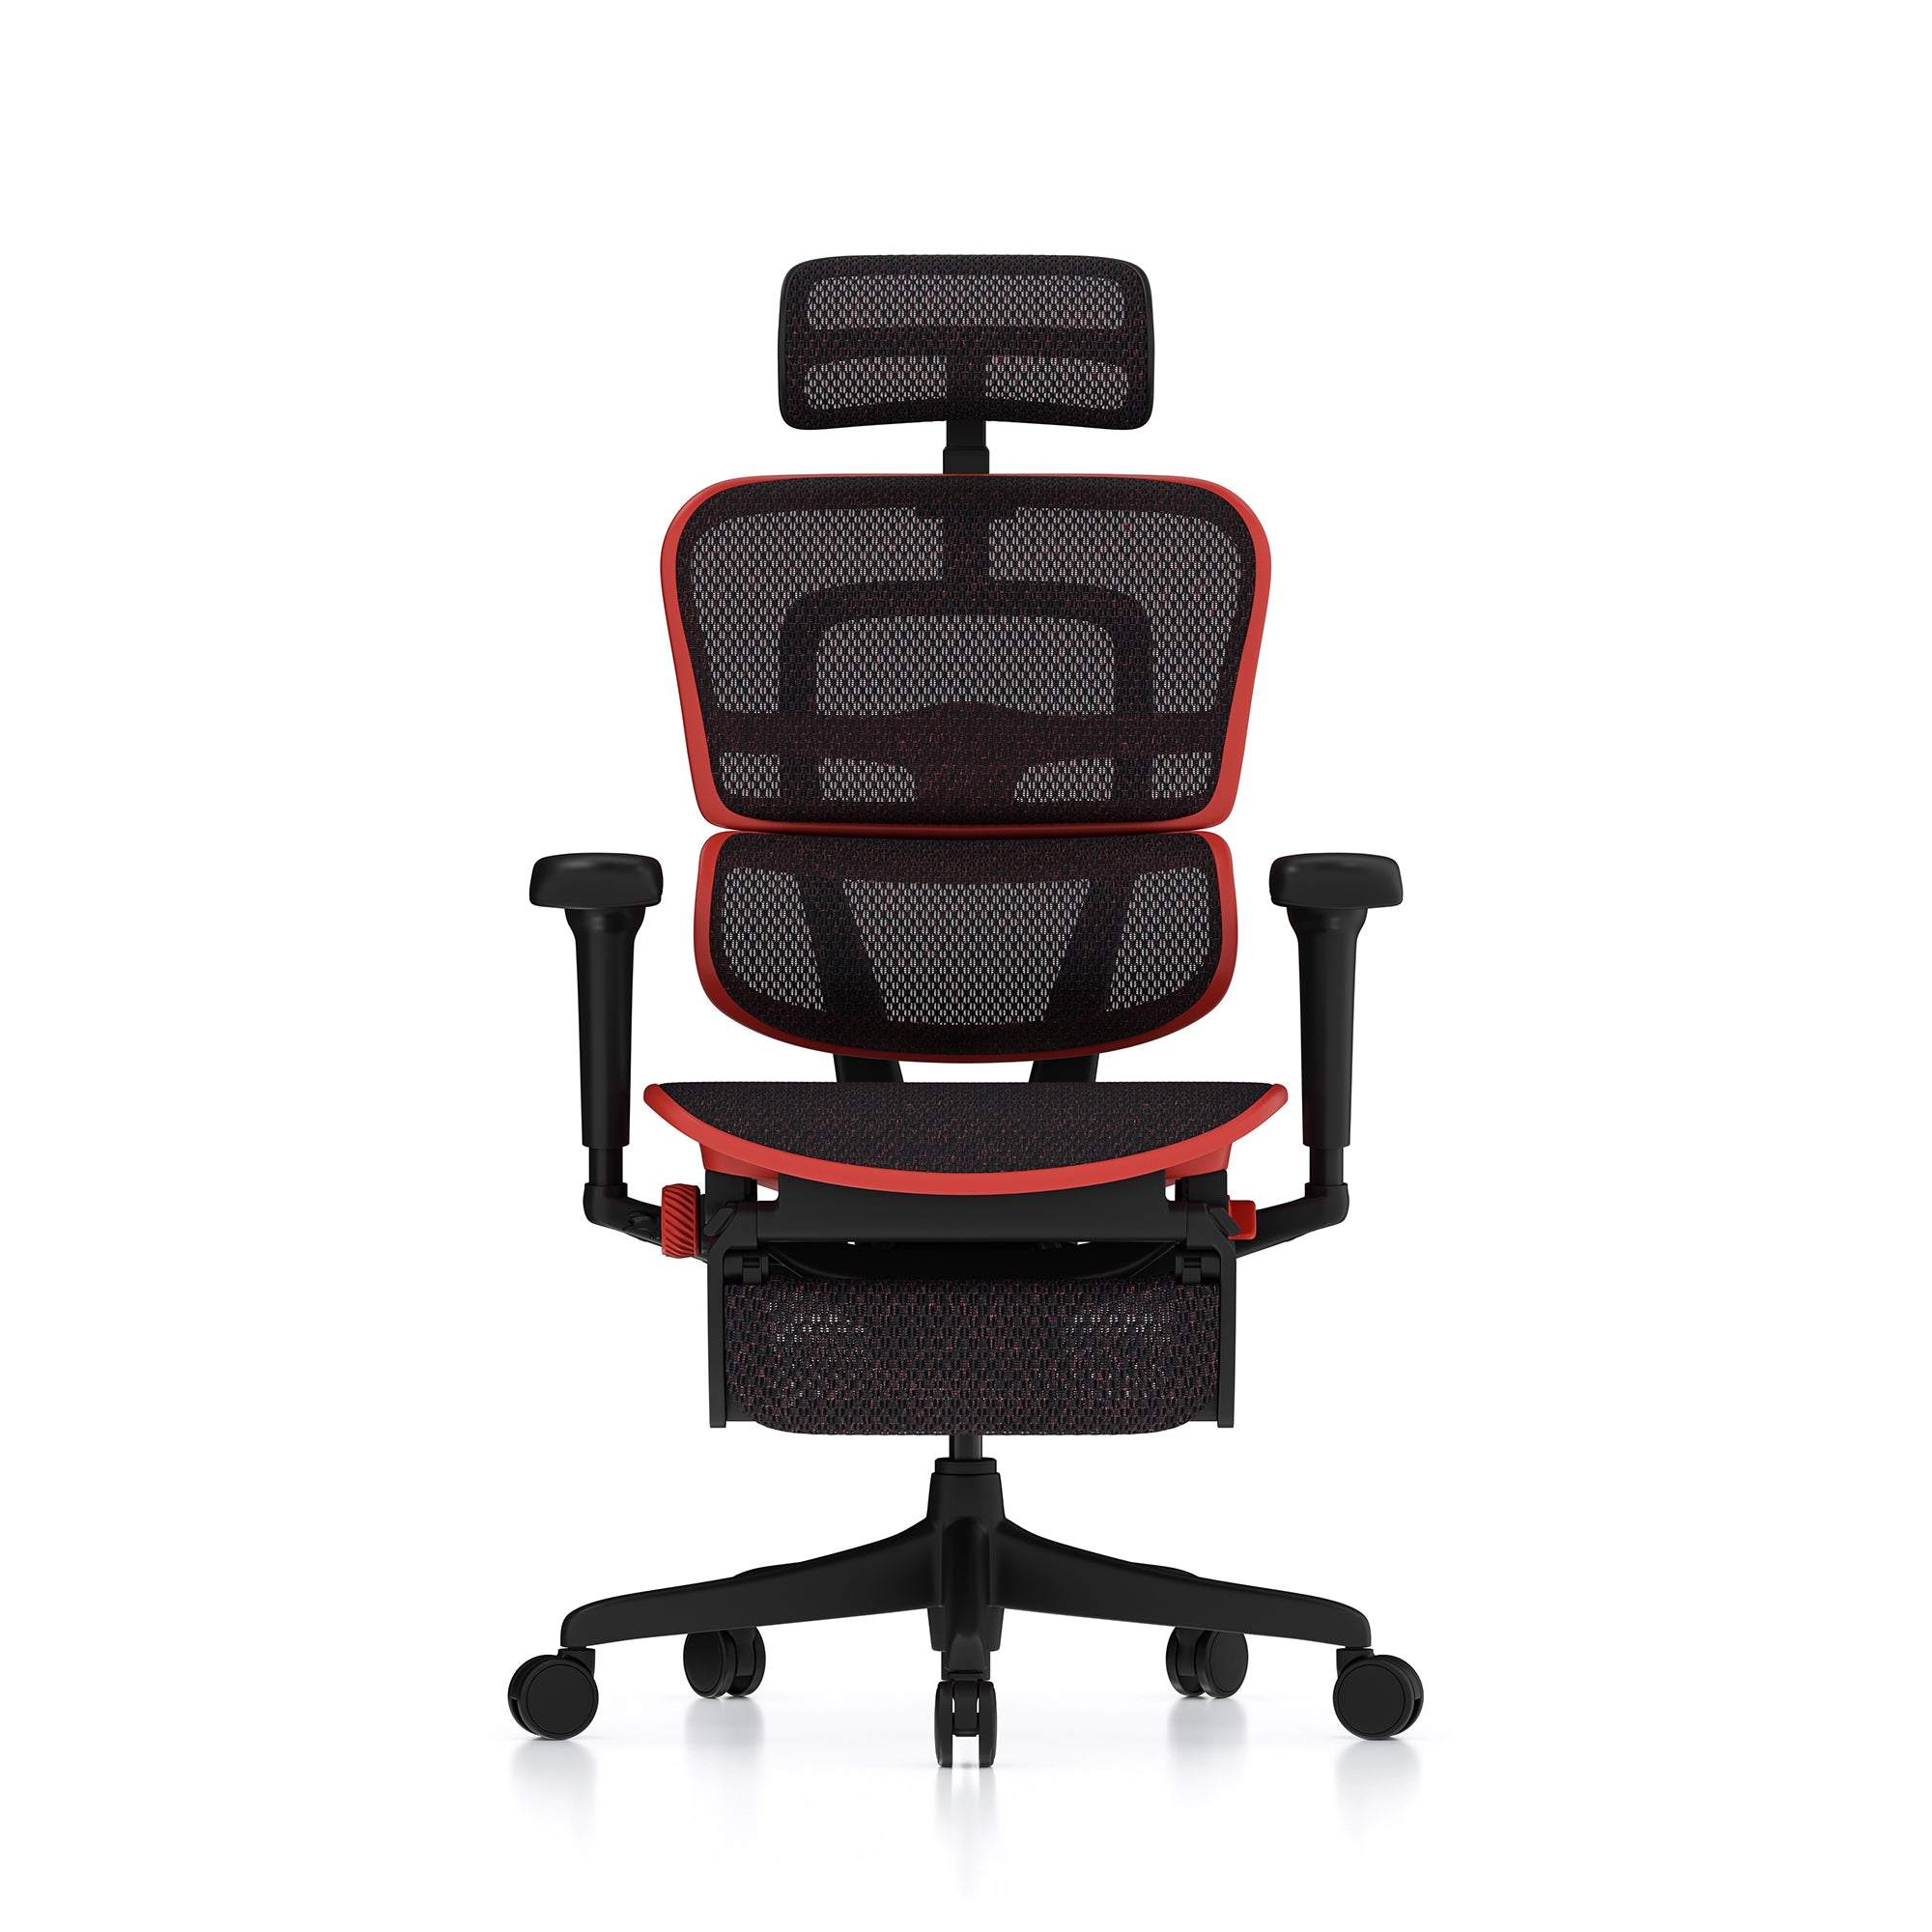 Ergohuman gaming chairs | Pro level comfort while you game